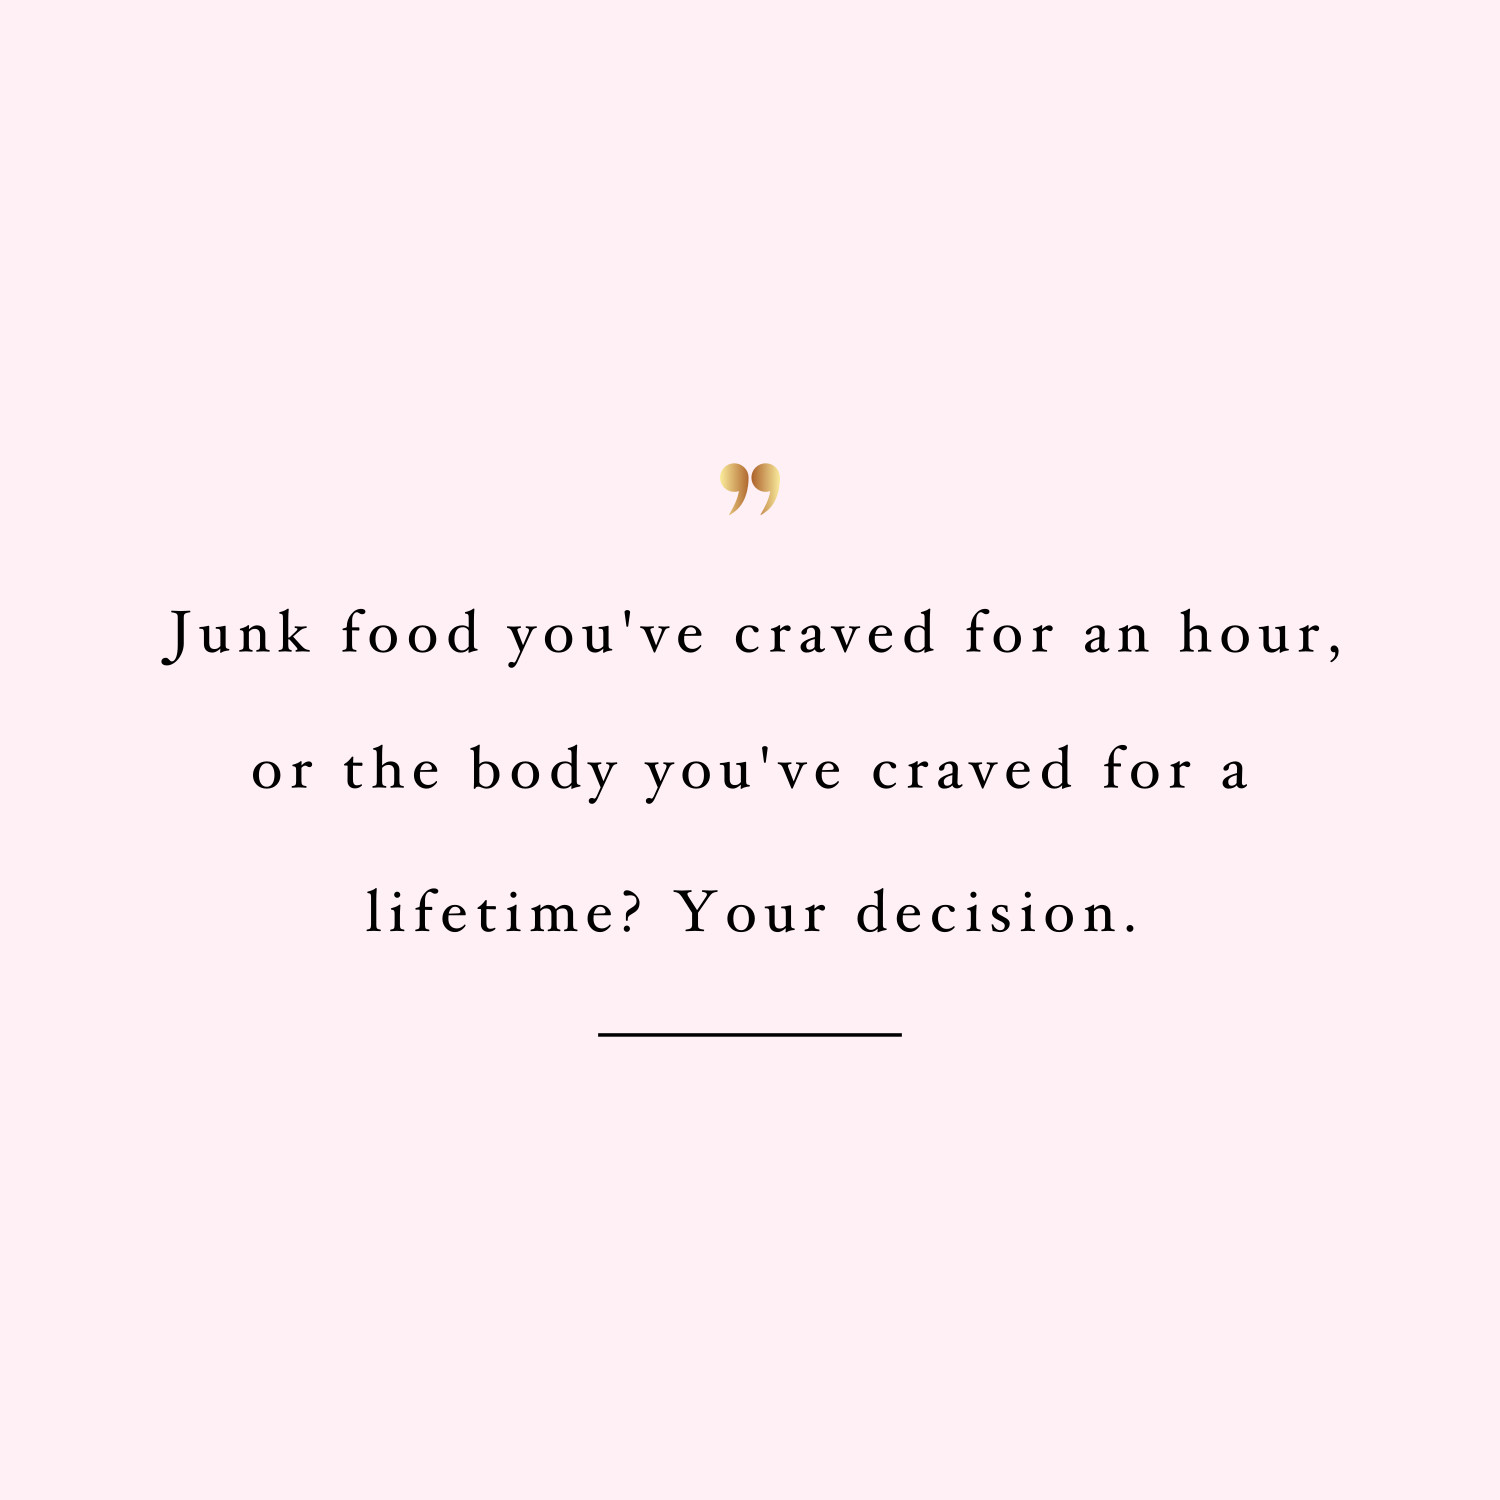 It's your decision! Browse our collection of inspirational fitness and weight loss quotes and get instant exercise and healthy eating motivation. Transform positive thoughts into positive actions and get fit, healthy and happy! https://www.spotebi.com/workout-motivation/its-your-decision/